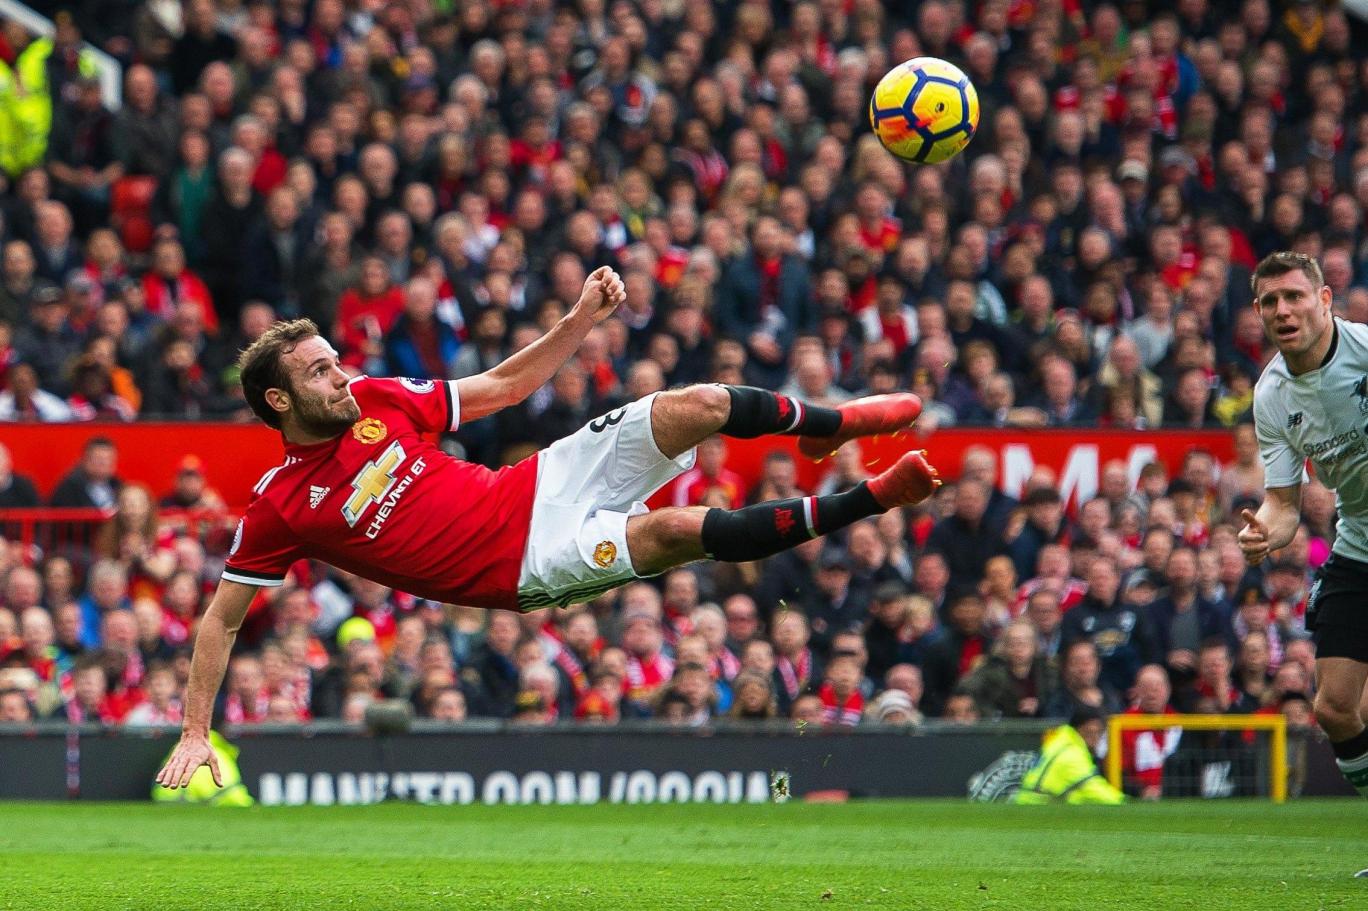 Manchester United set to reopen talks with Juan Mata